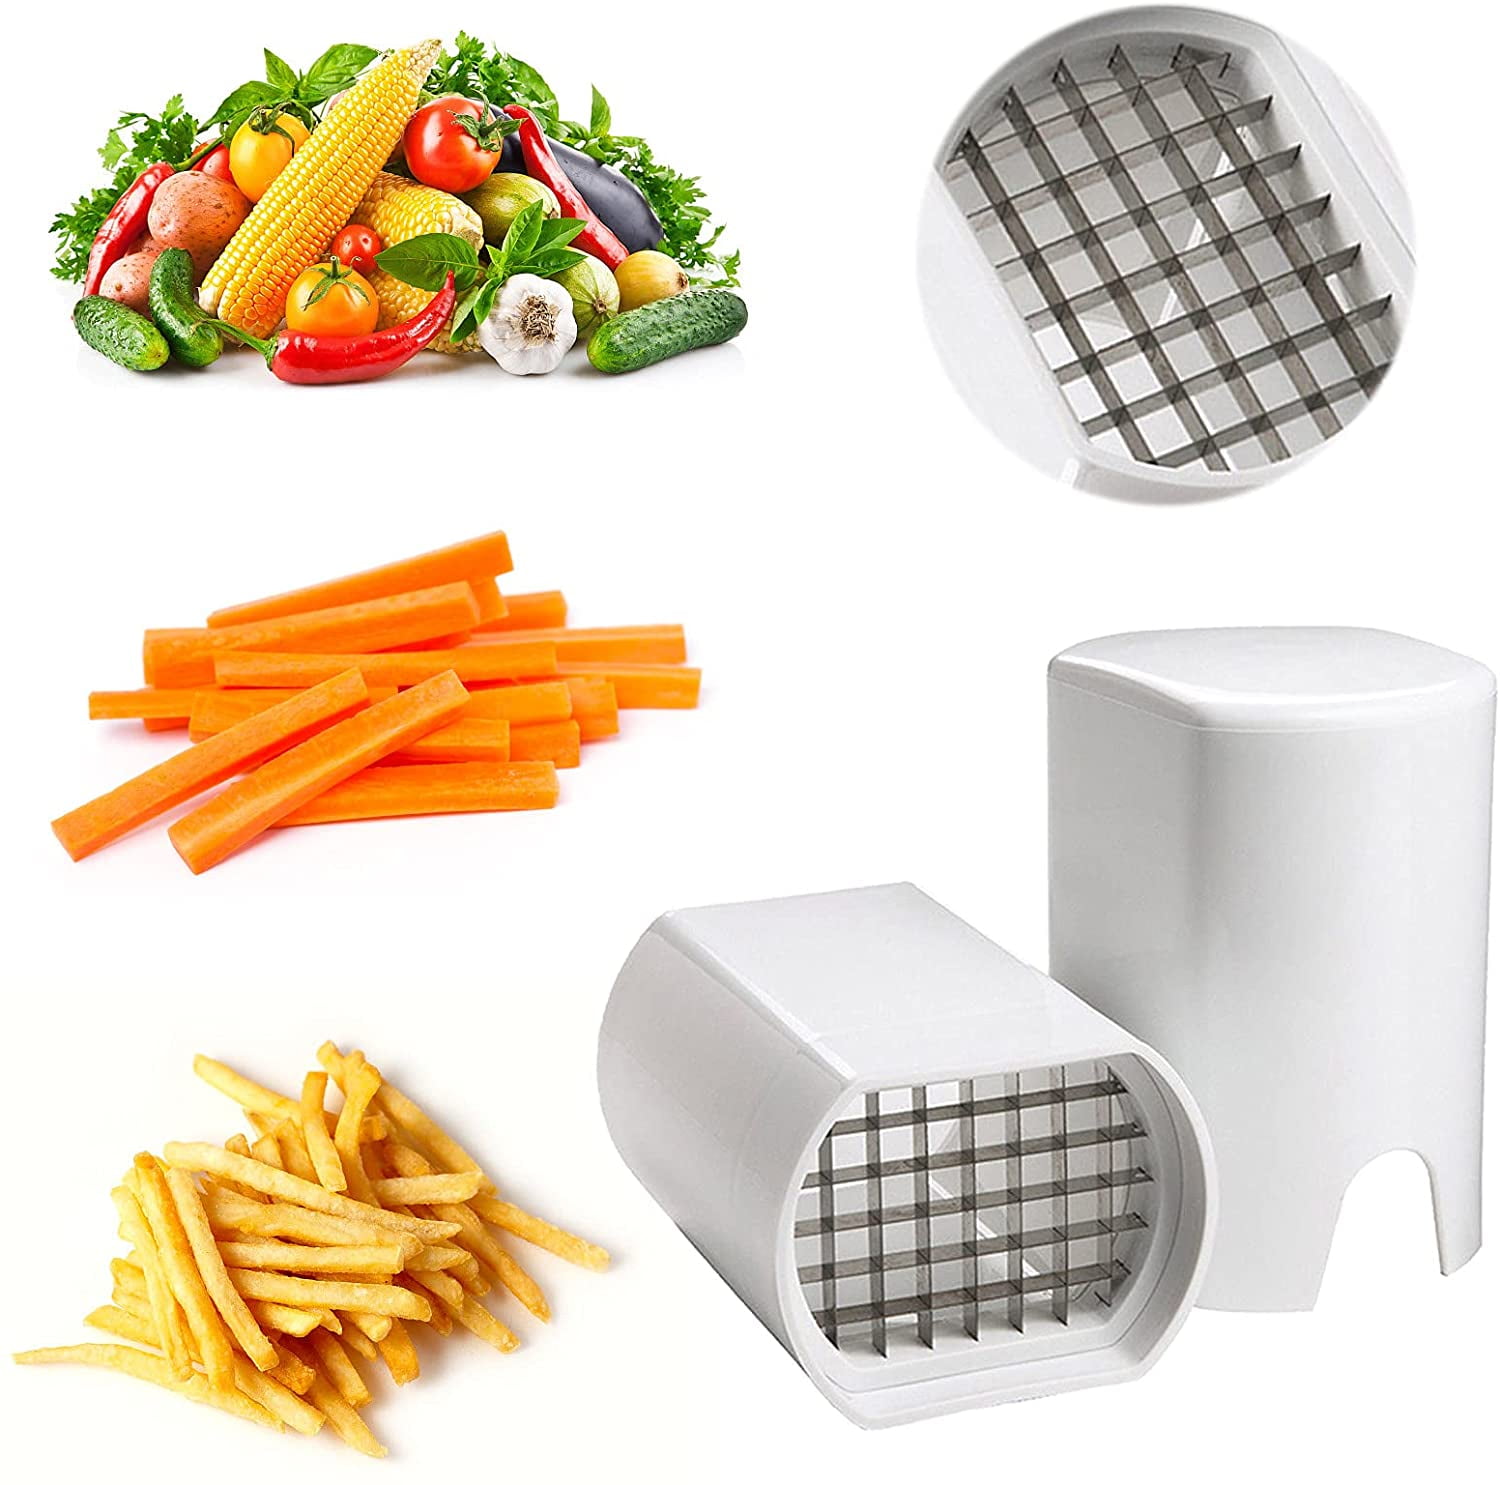  Kitchen Buddy - Easy French Fry Cutter - Stainless Steel  Vegetable & Potato Slicer - 2 Blade Inserts - Extra Peeler - For Natural  Fries At Home - Cut Thick or